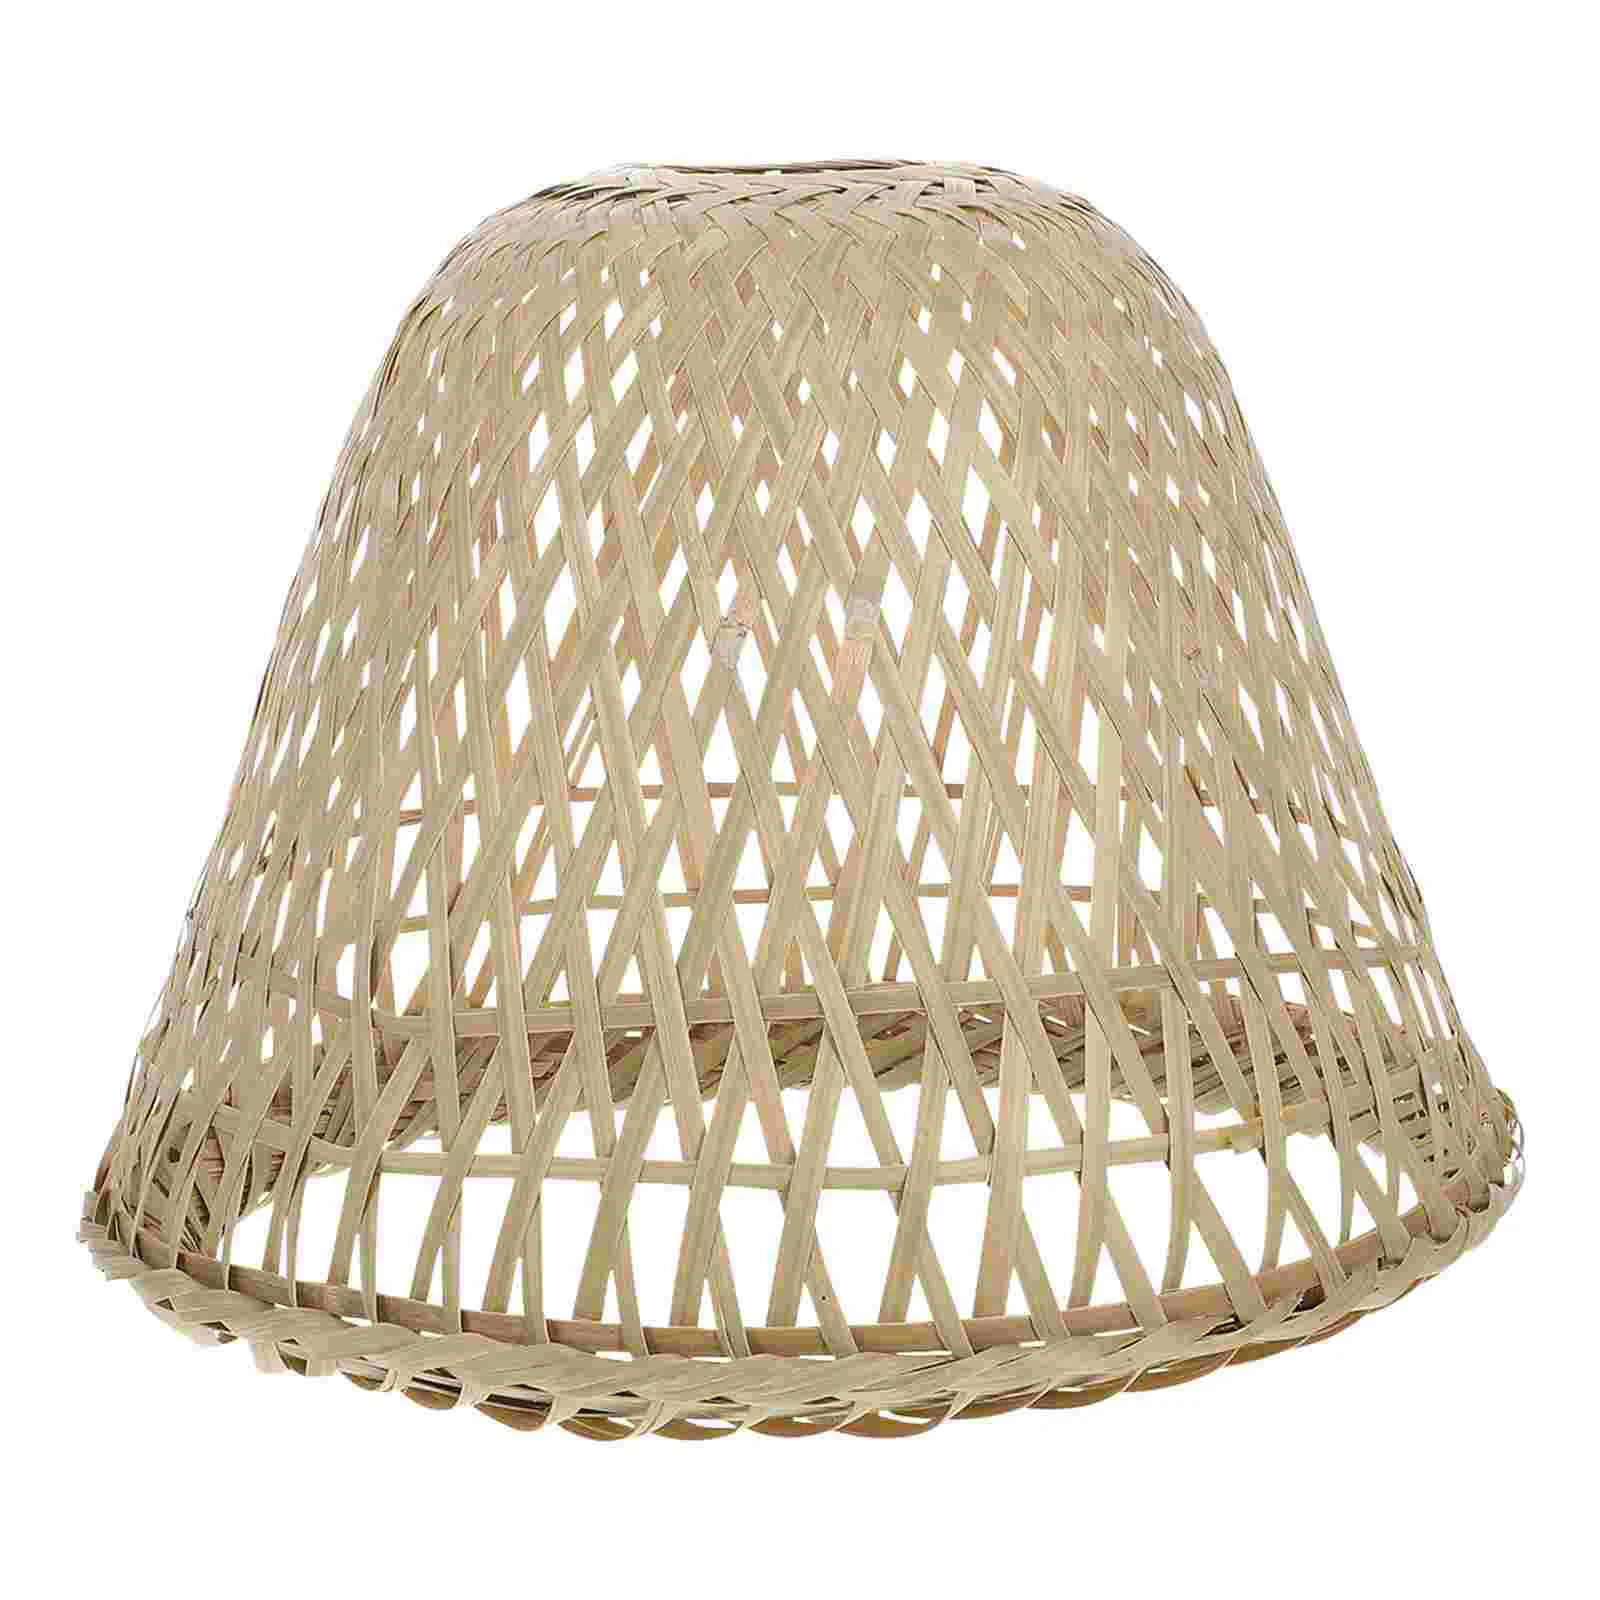 Table Lamp Shade Lampshades Floor Lamps Drum Lampshade Woven Chandelier Shades Wicker Lamp Shade Lamp Shades Table Lamps